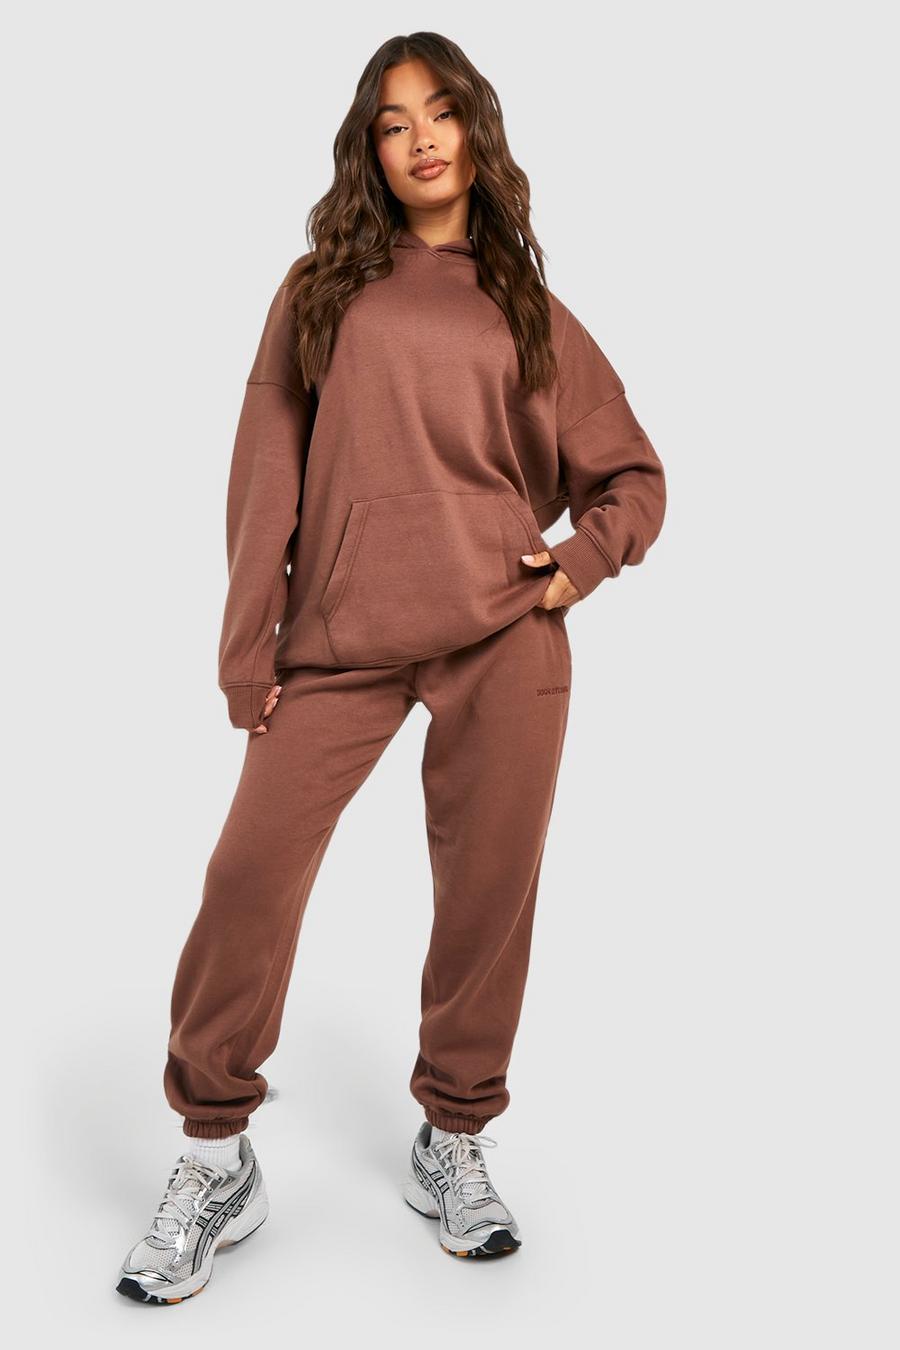 Chocolate DSGN Studio Embroidered Hooded Tracksuit 